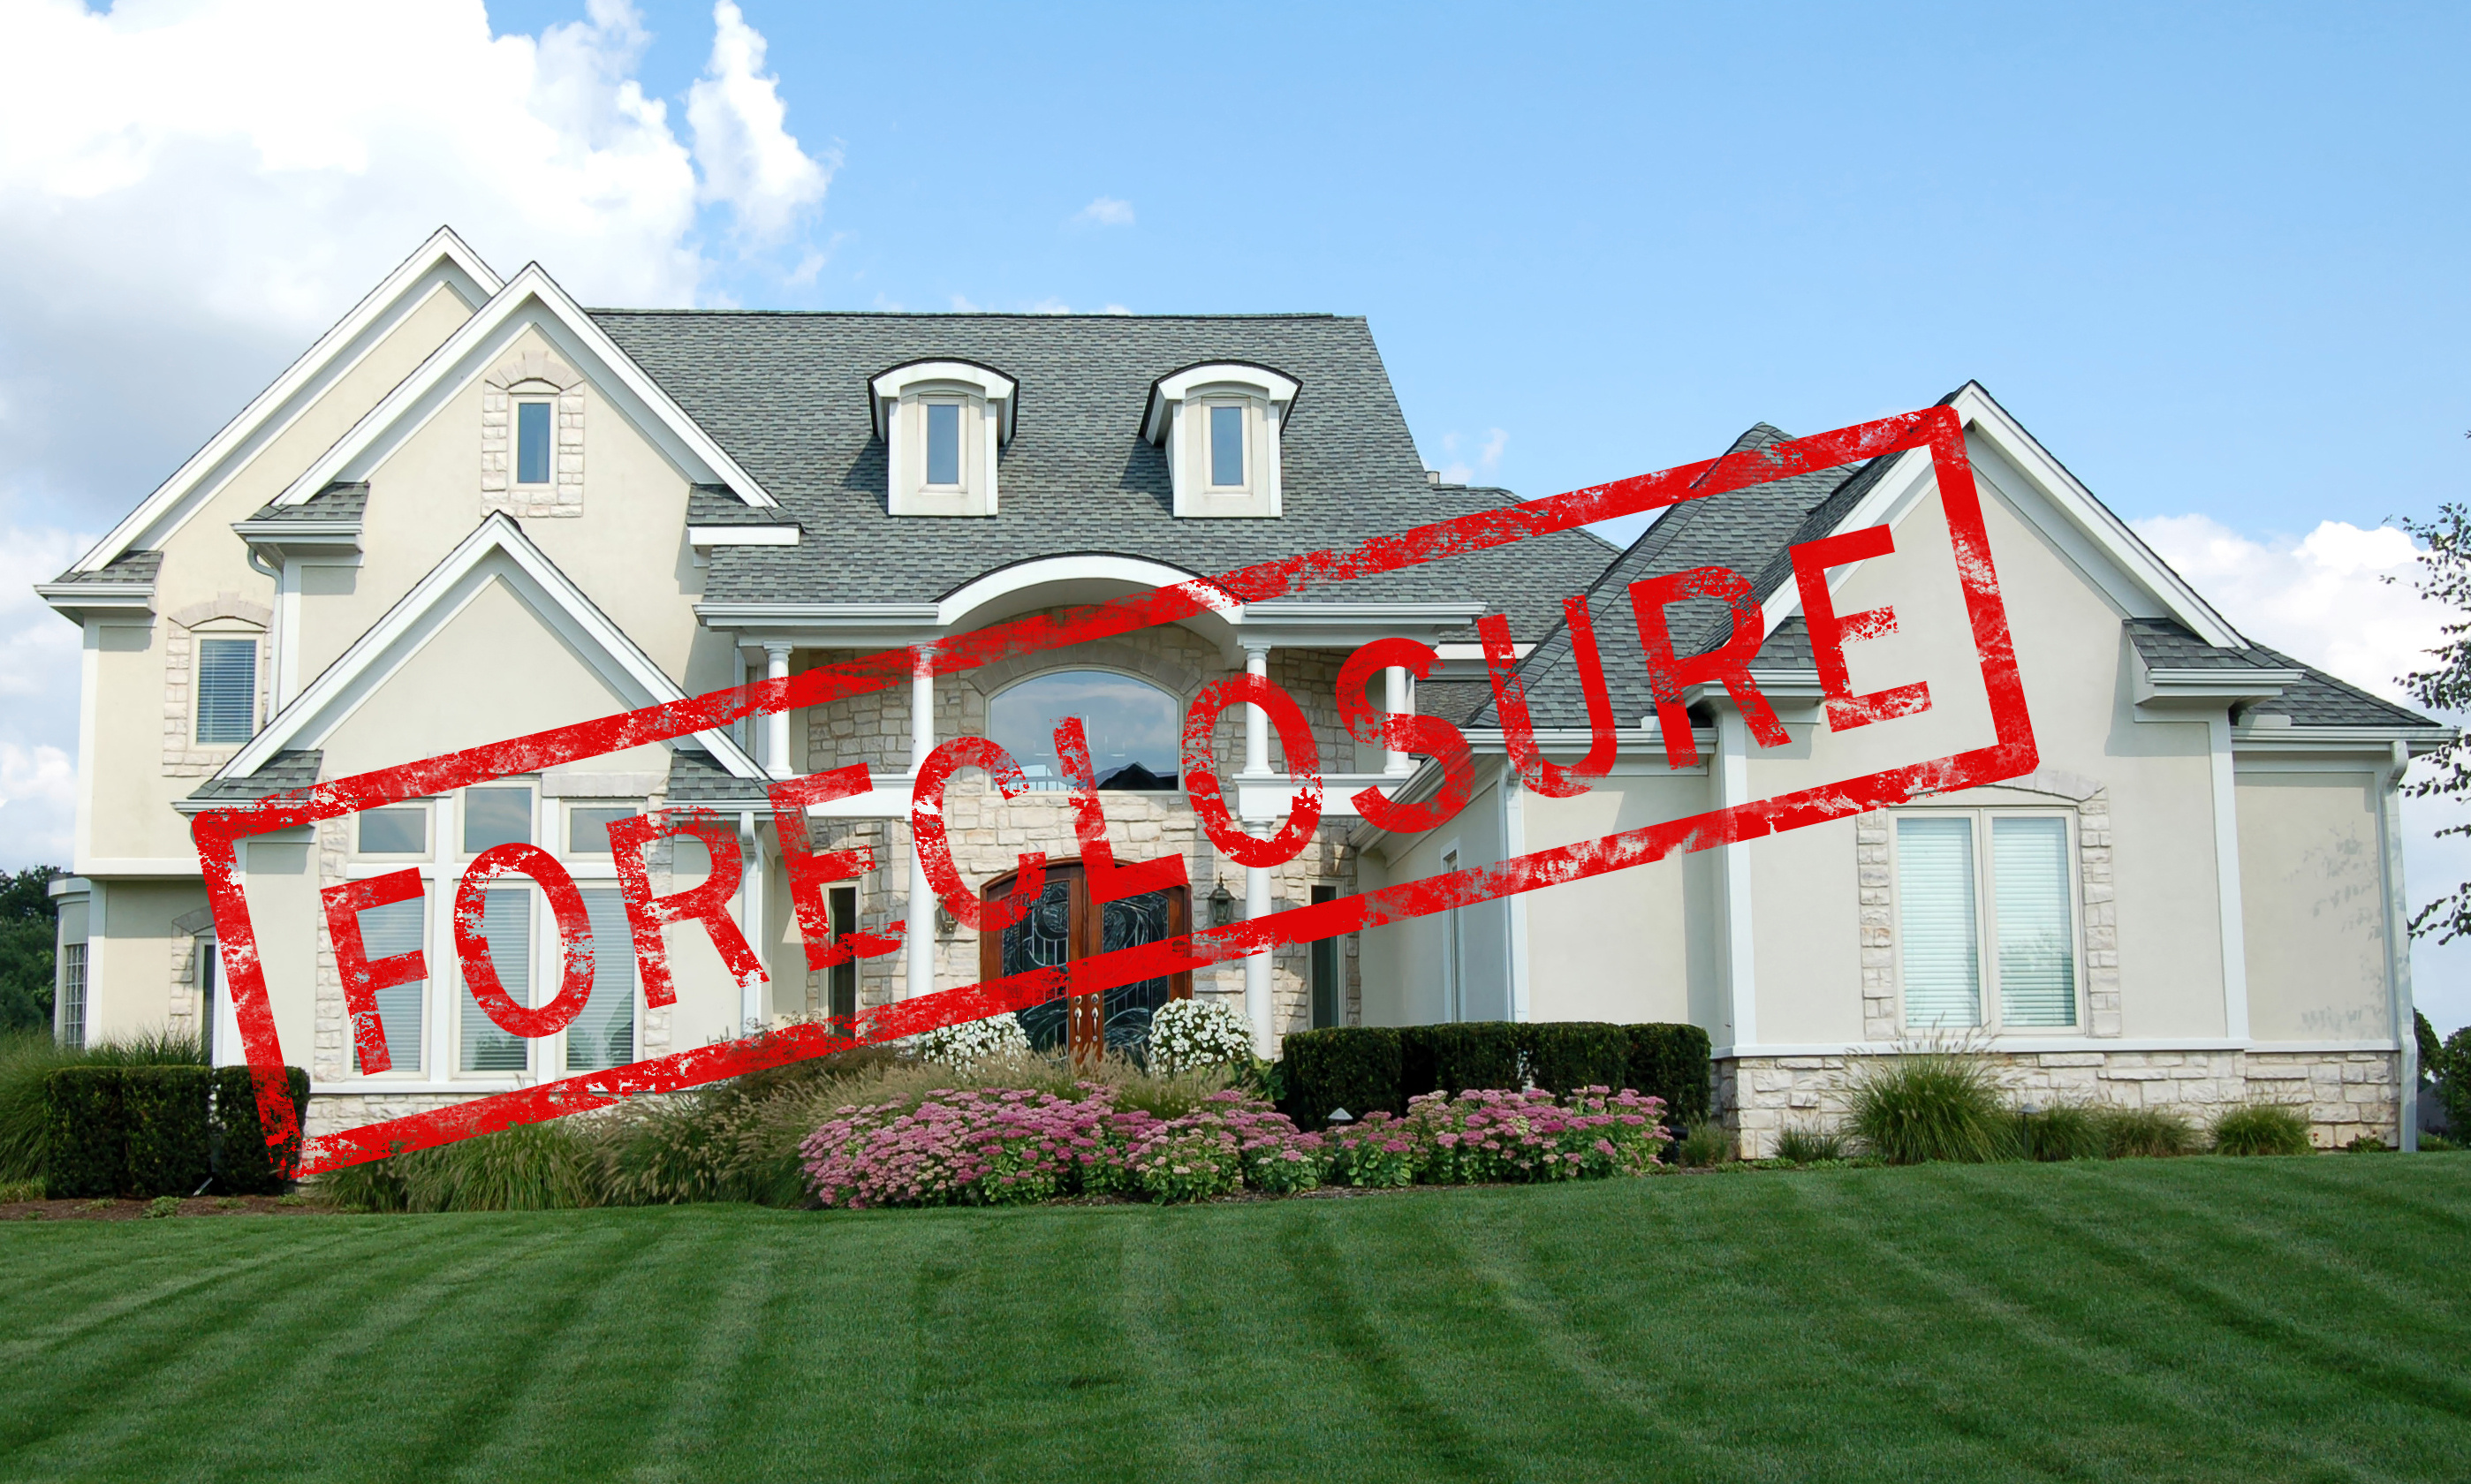 Call Assured Appraisals, LLC. to order valuations on Gila foreclosures